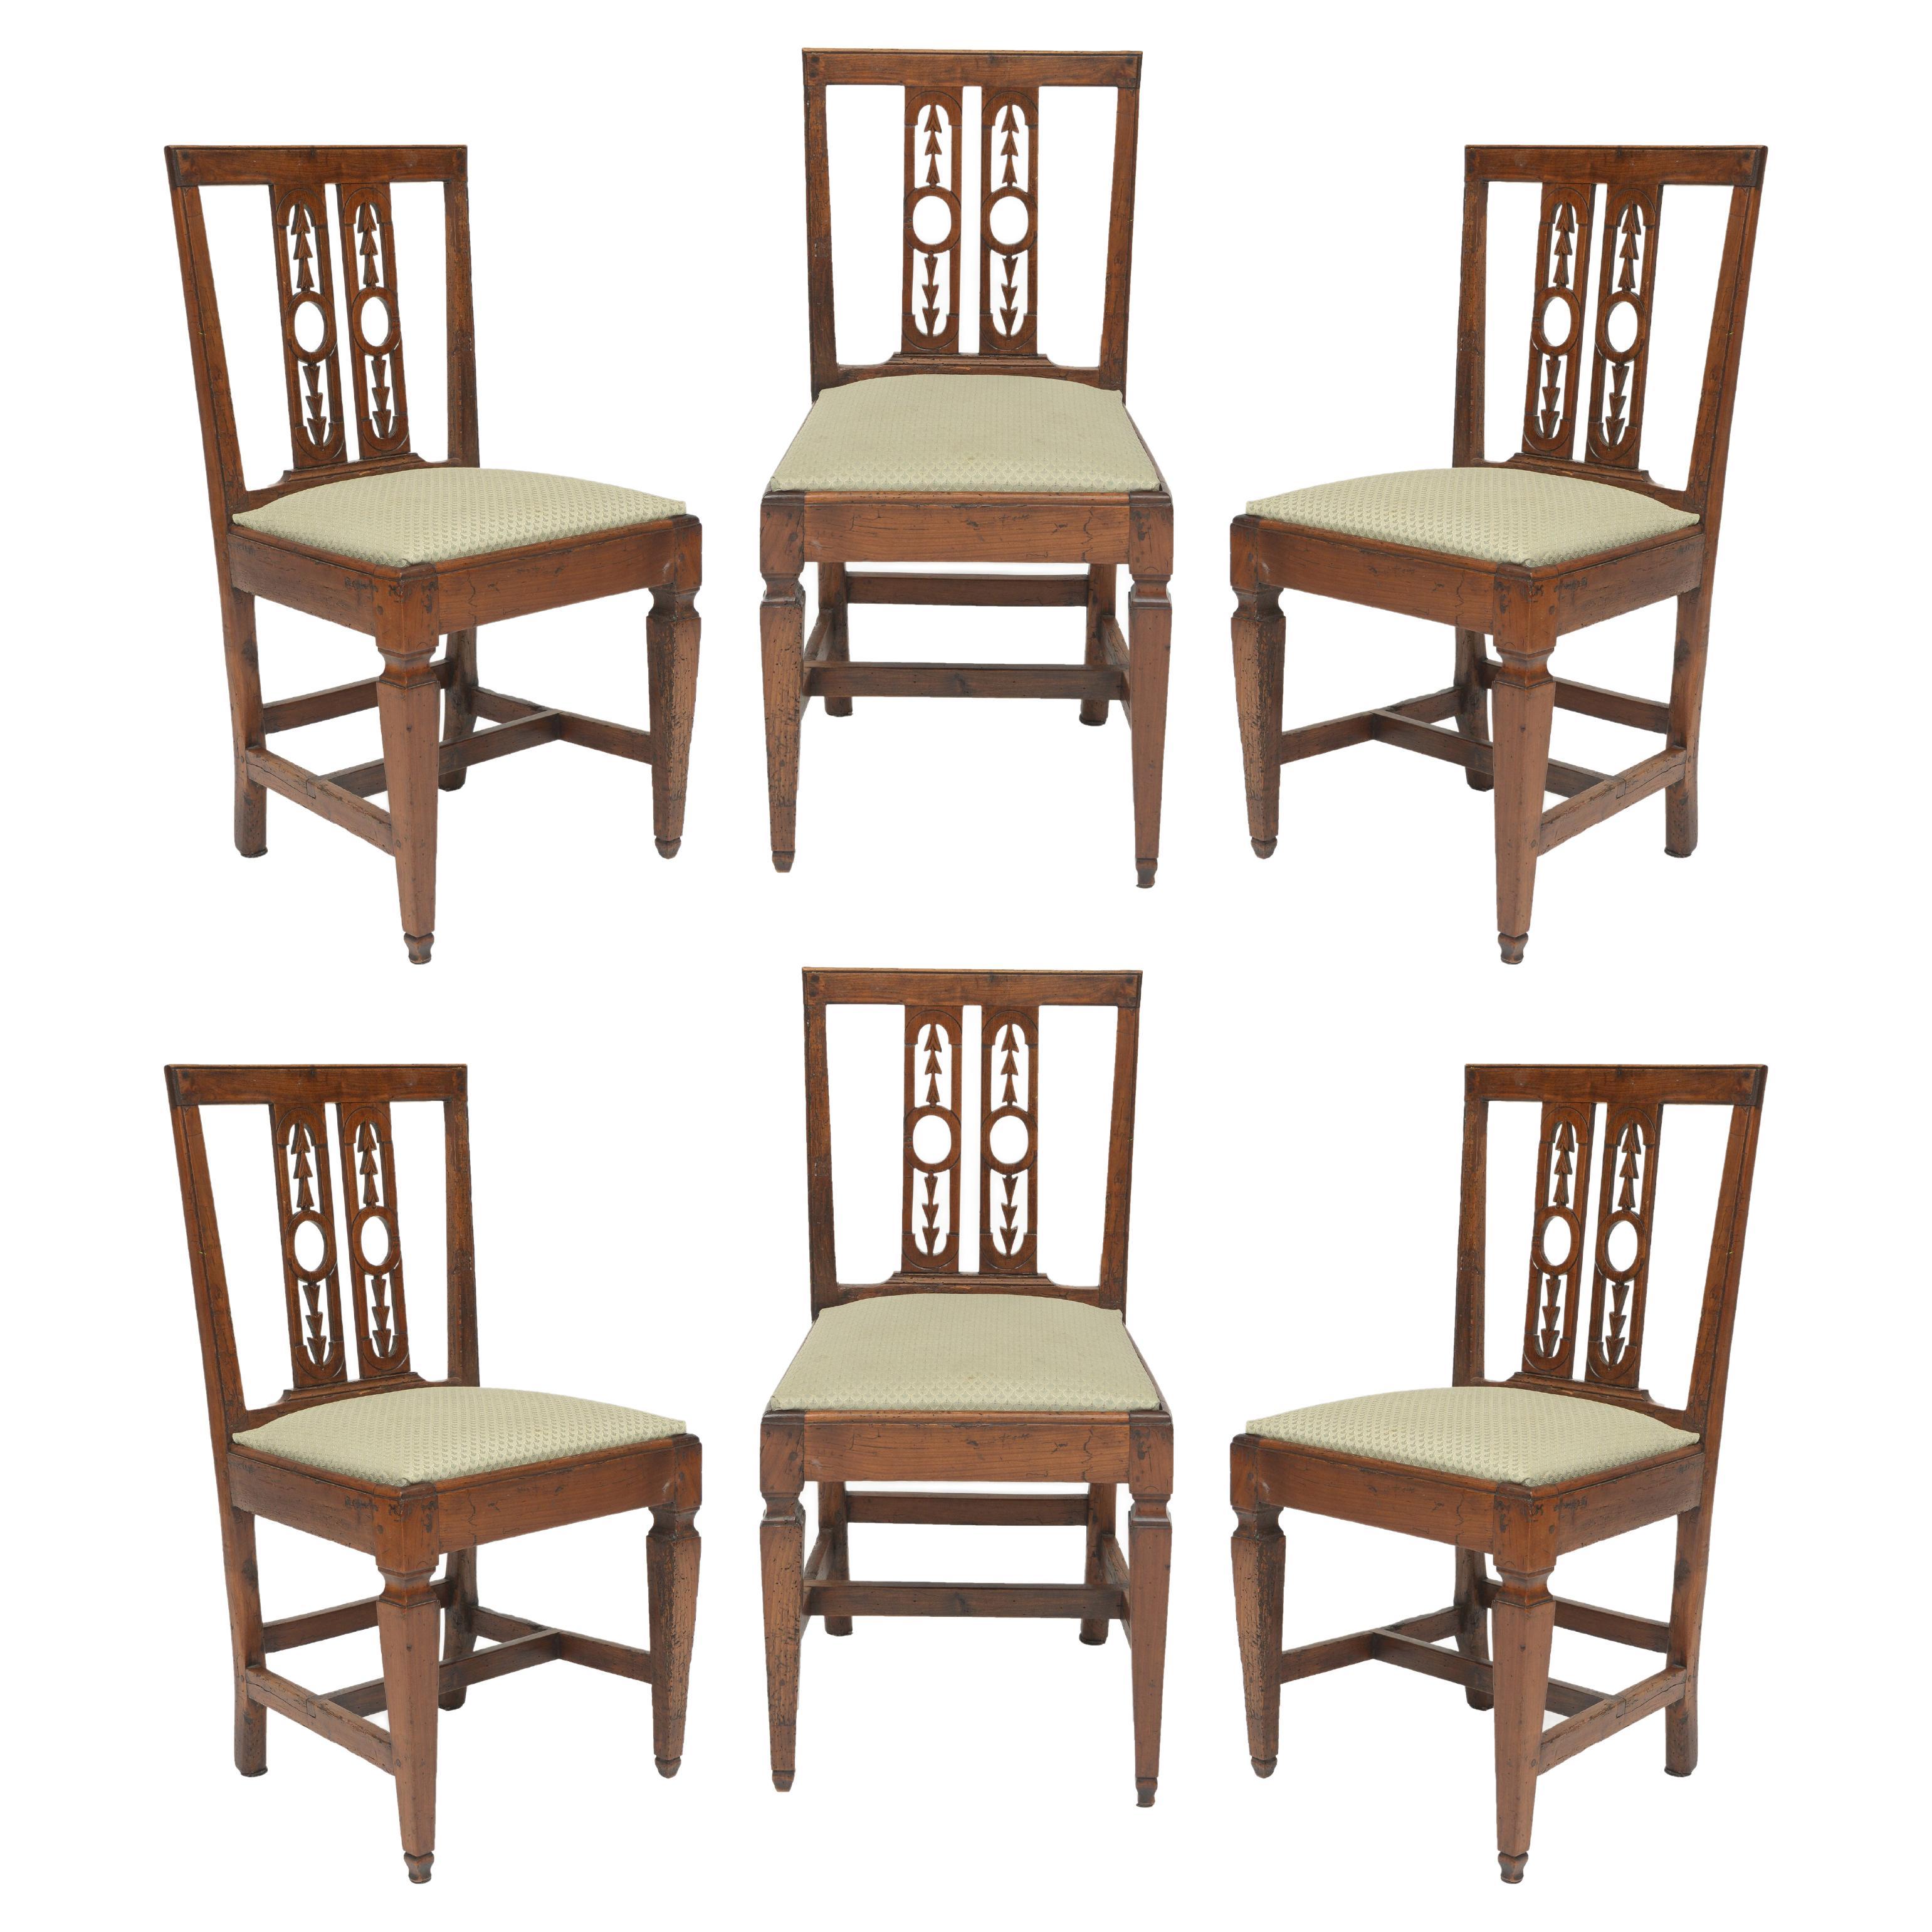 Early 19th Century Italian Dining Chairs - Set of 6